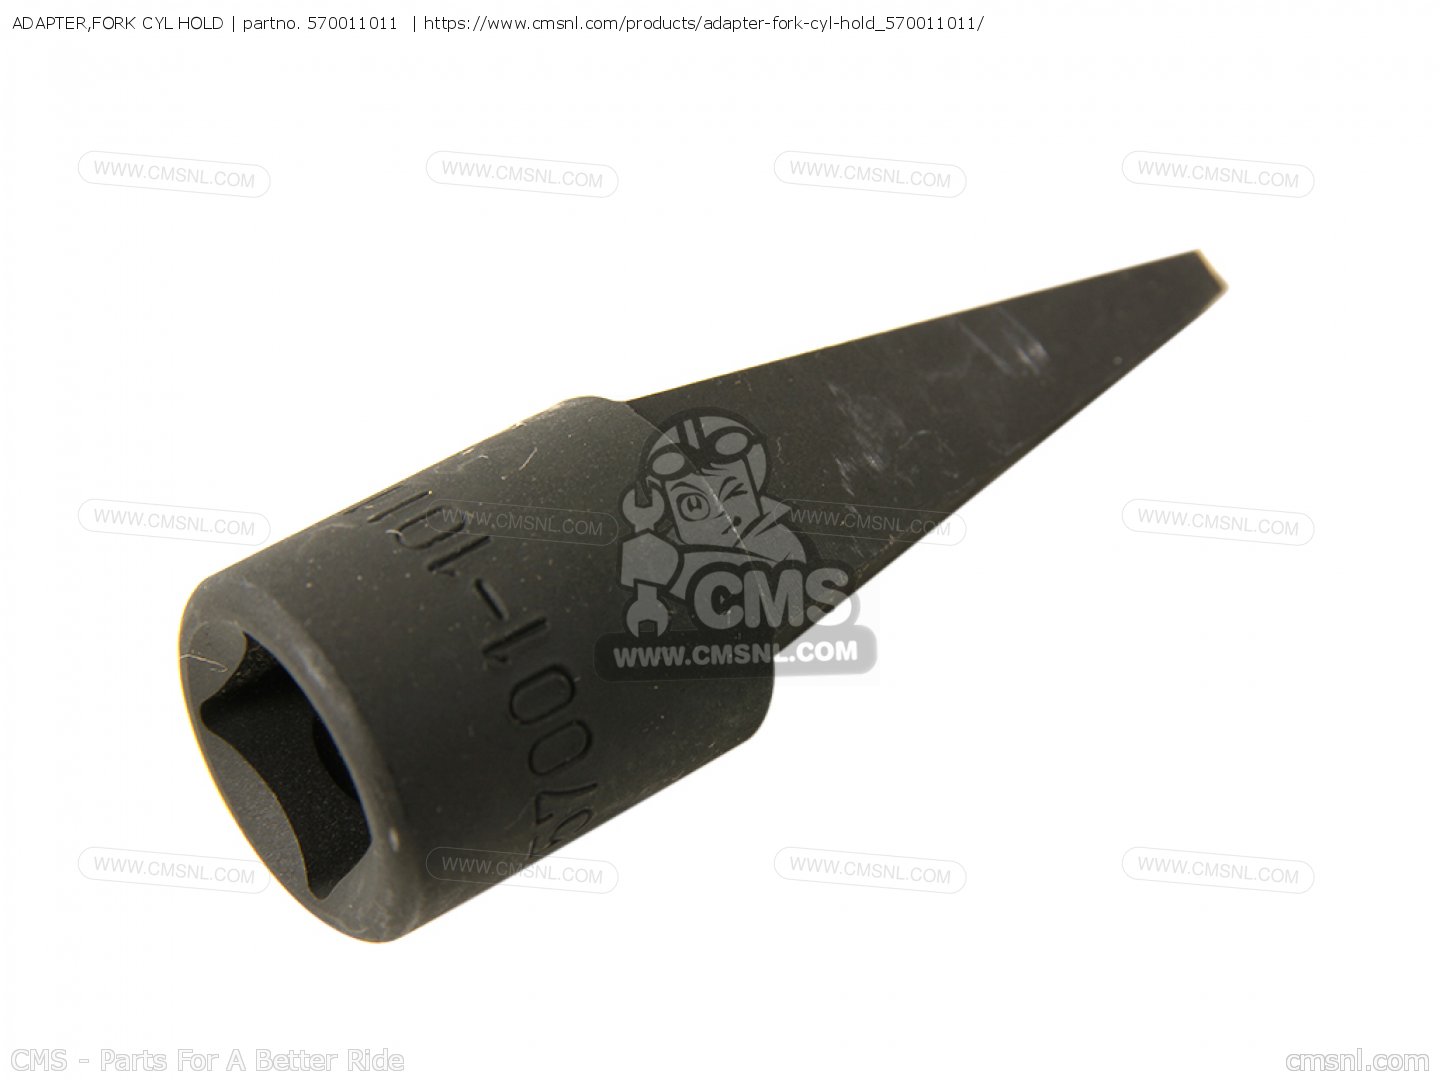 ADAPTER,FORK CYL HOLD KL250A4 KLR250 CANADA - order at CMSNL